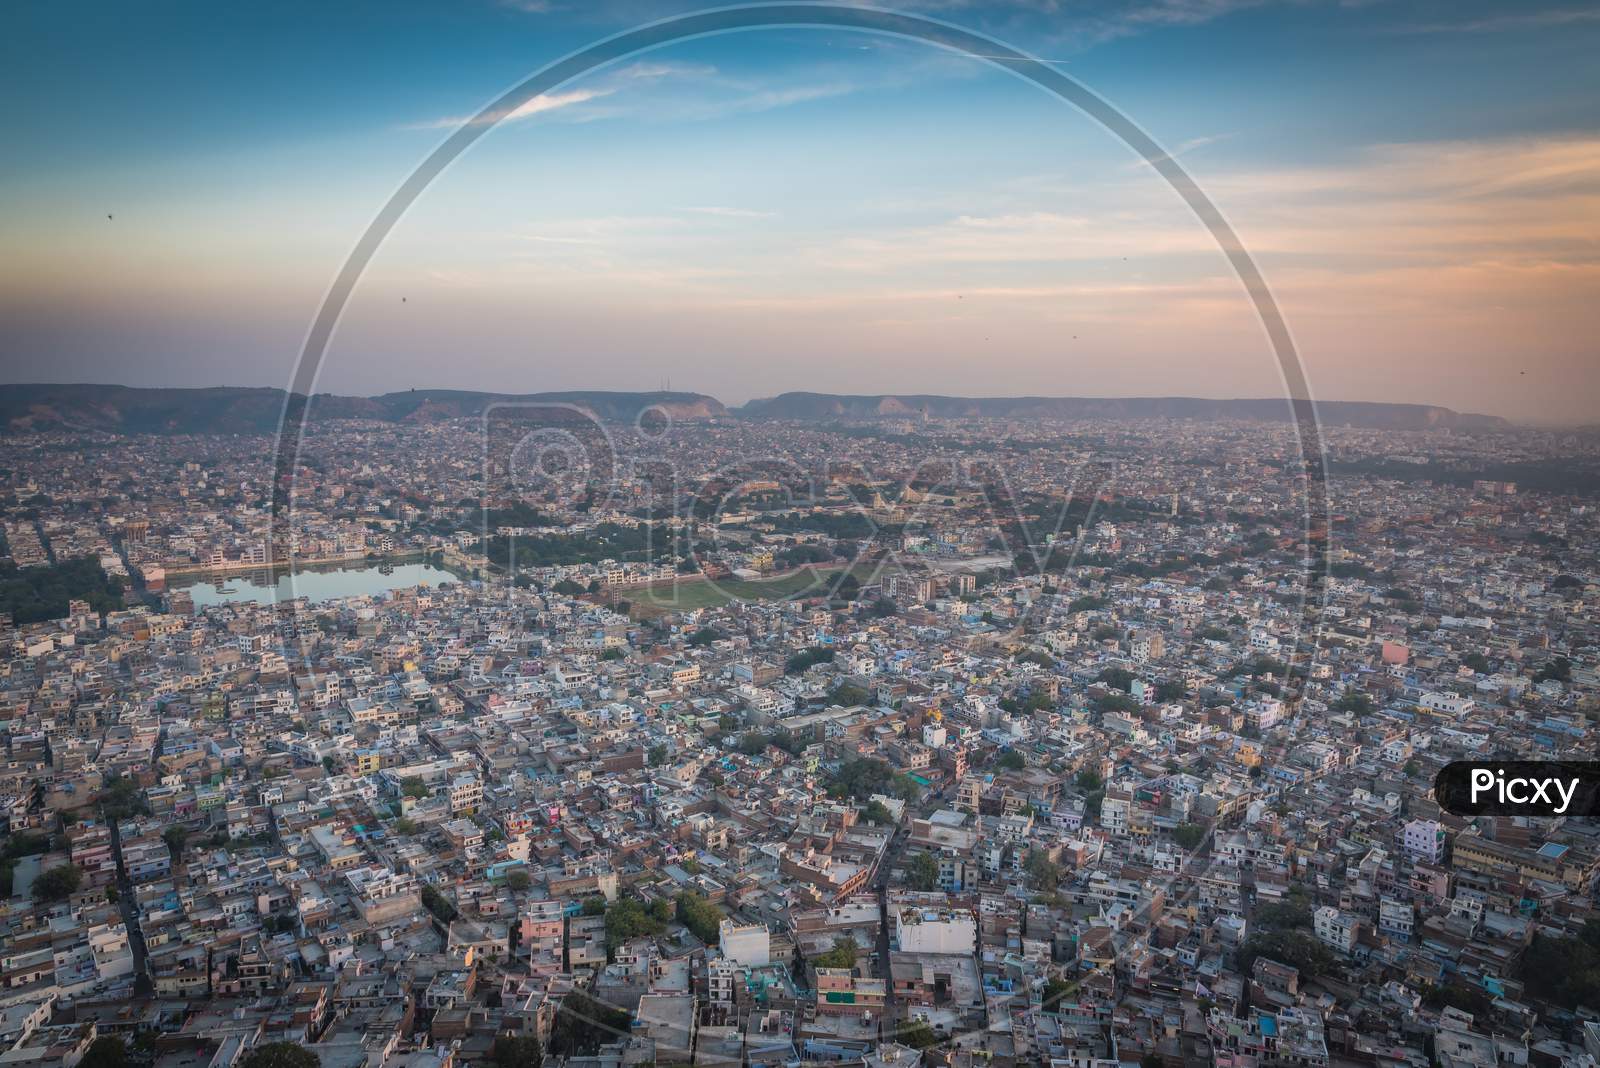 Pink City Or Jaipur City View From Nahargarh Fort, A Spectacular View From Above